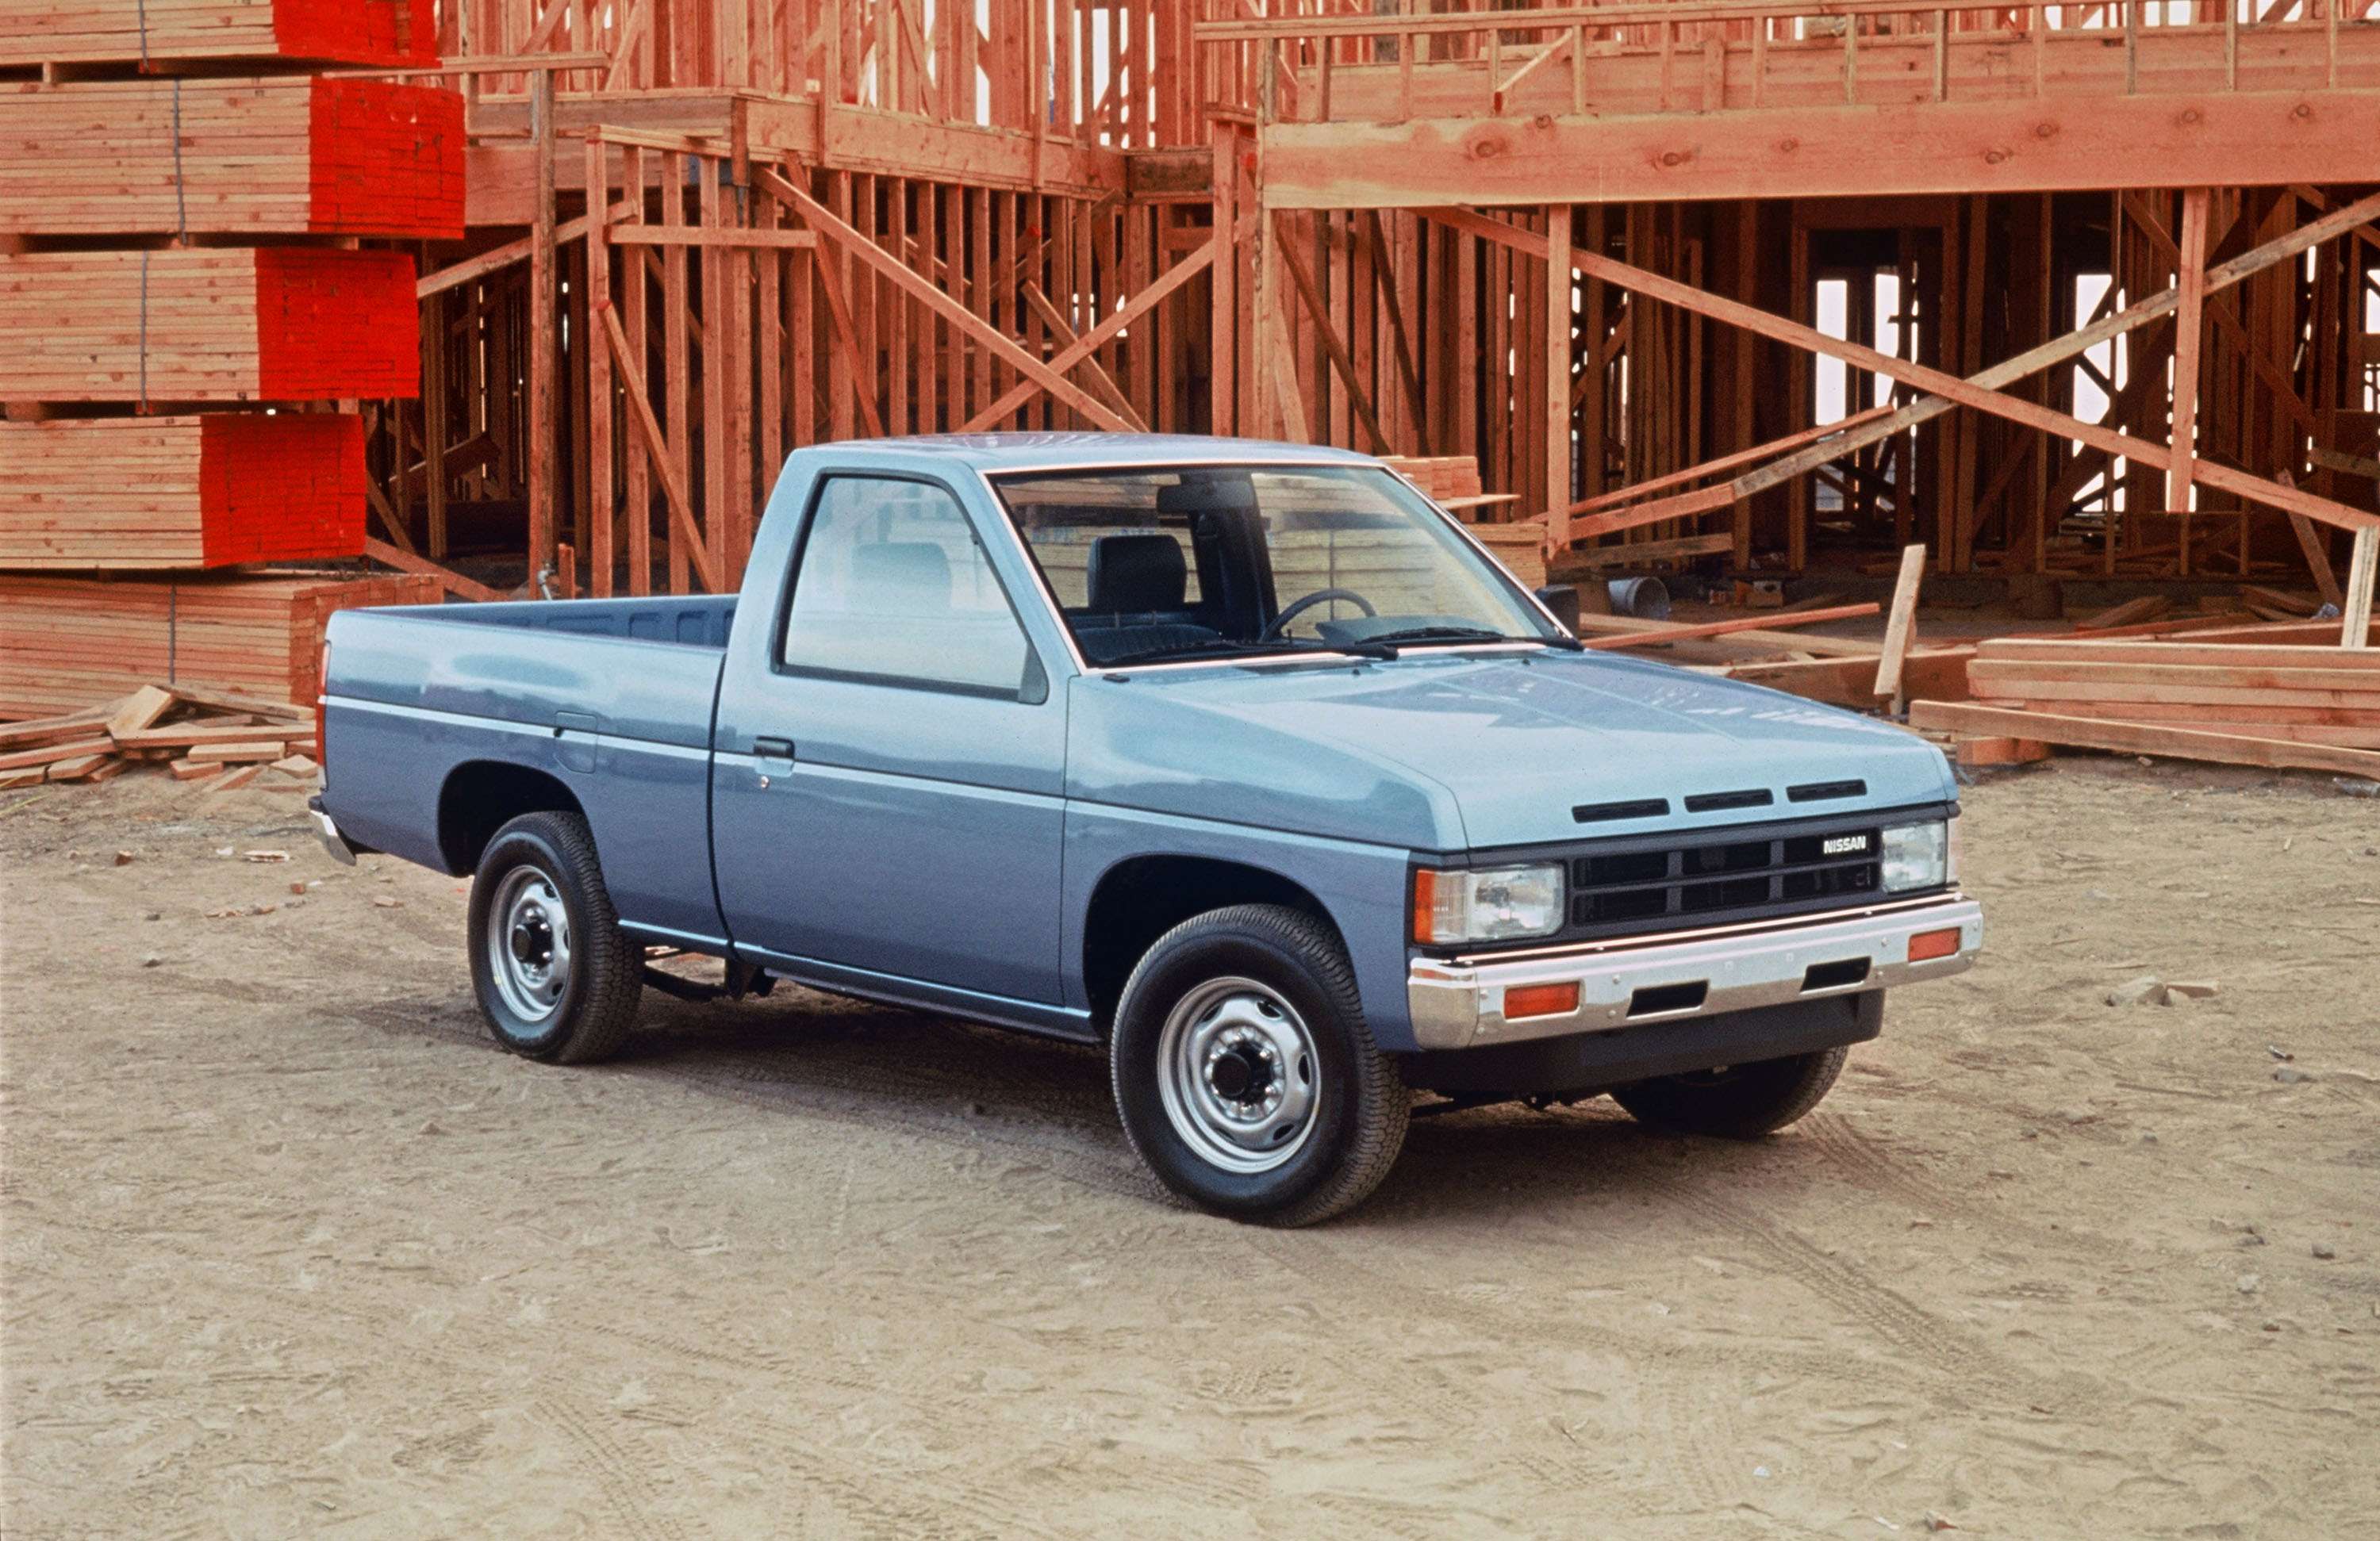 Getting to Know the Nissan D21 Hardbody - Nissan Forum | Nissan Forums